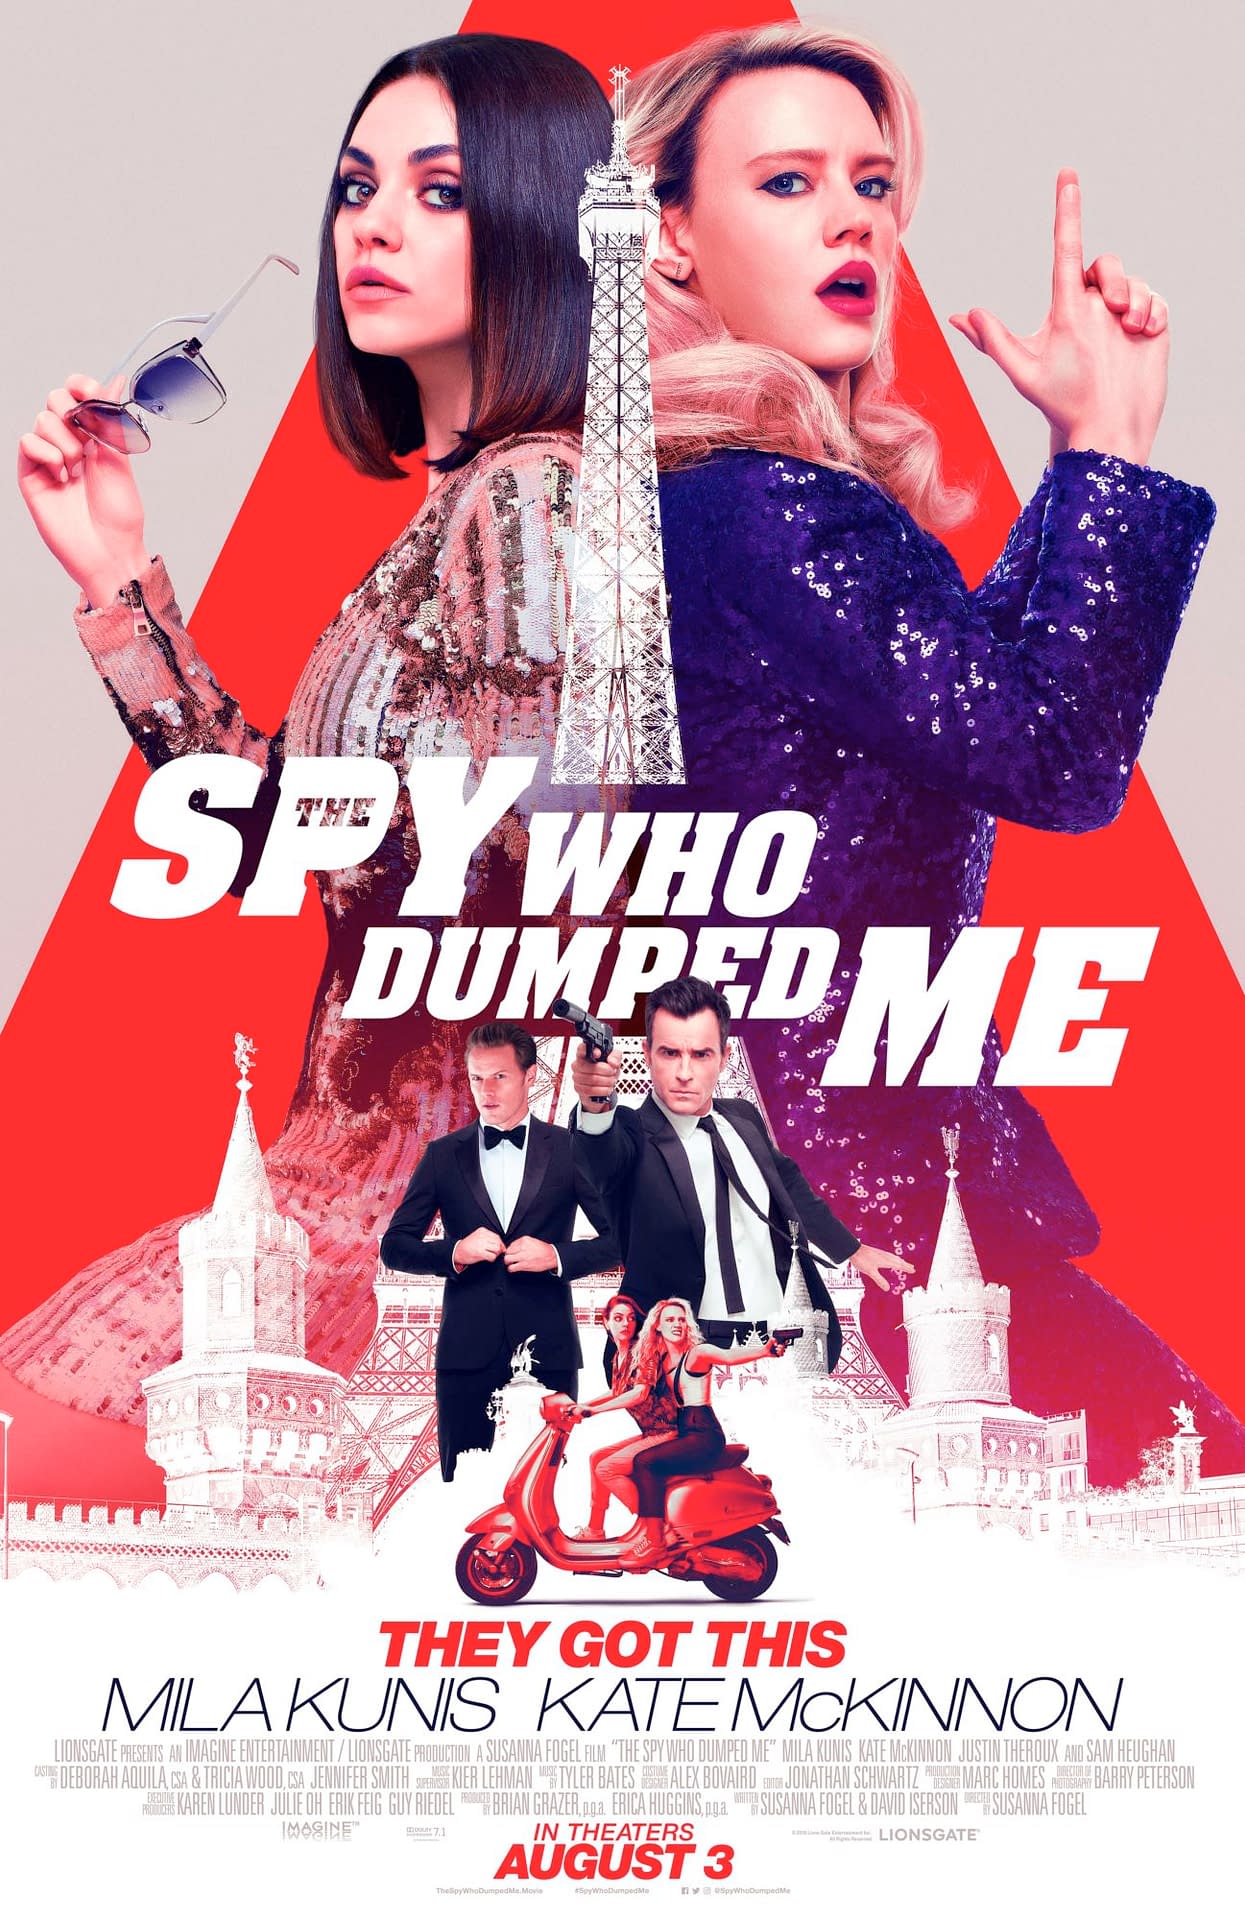 New Clip and Poster for The Spy Who Dumped Me